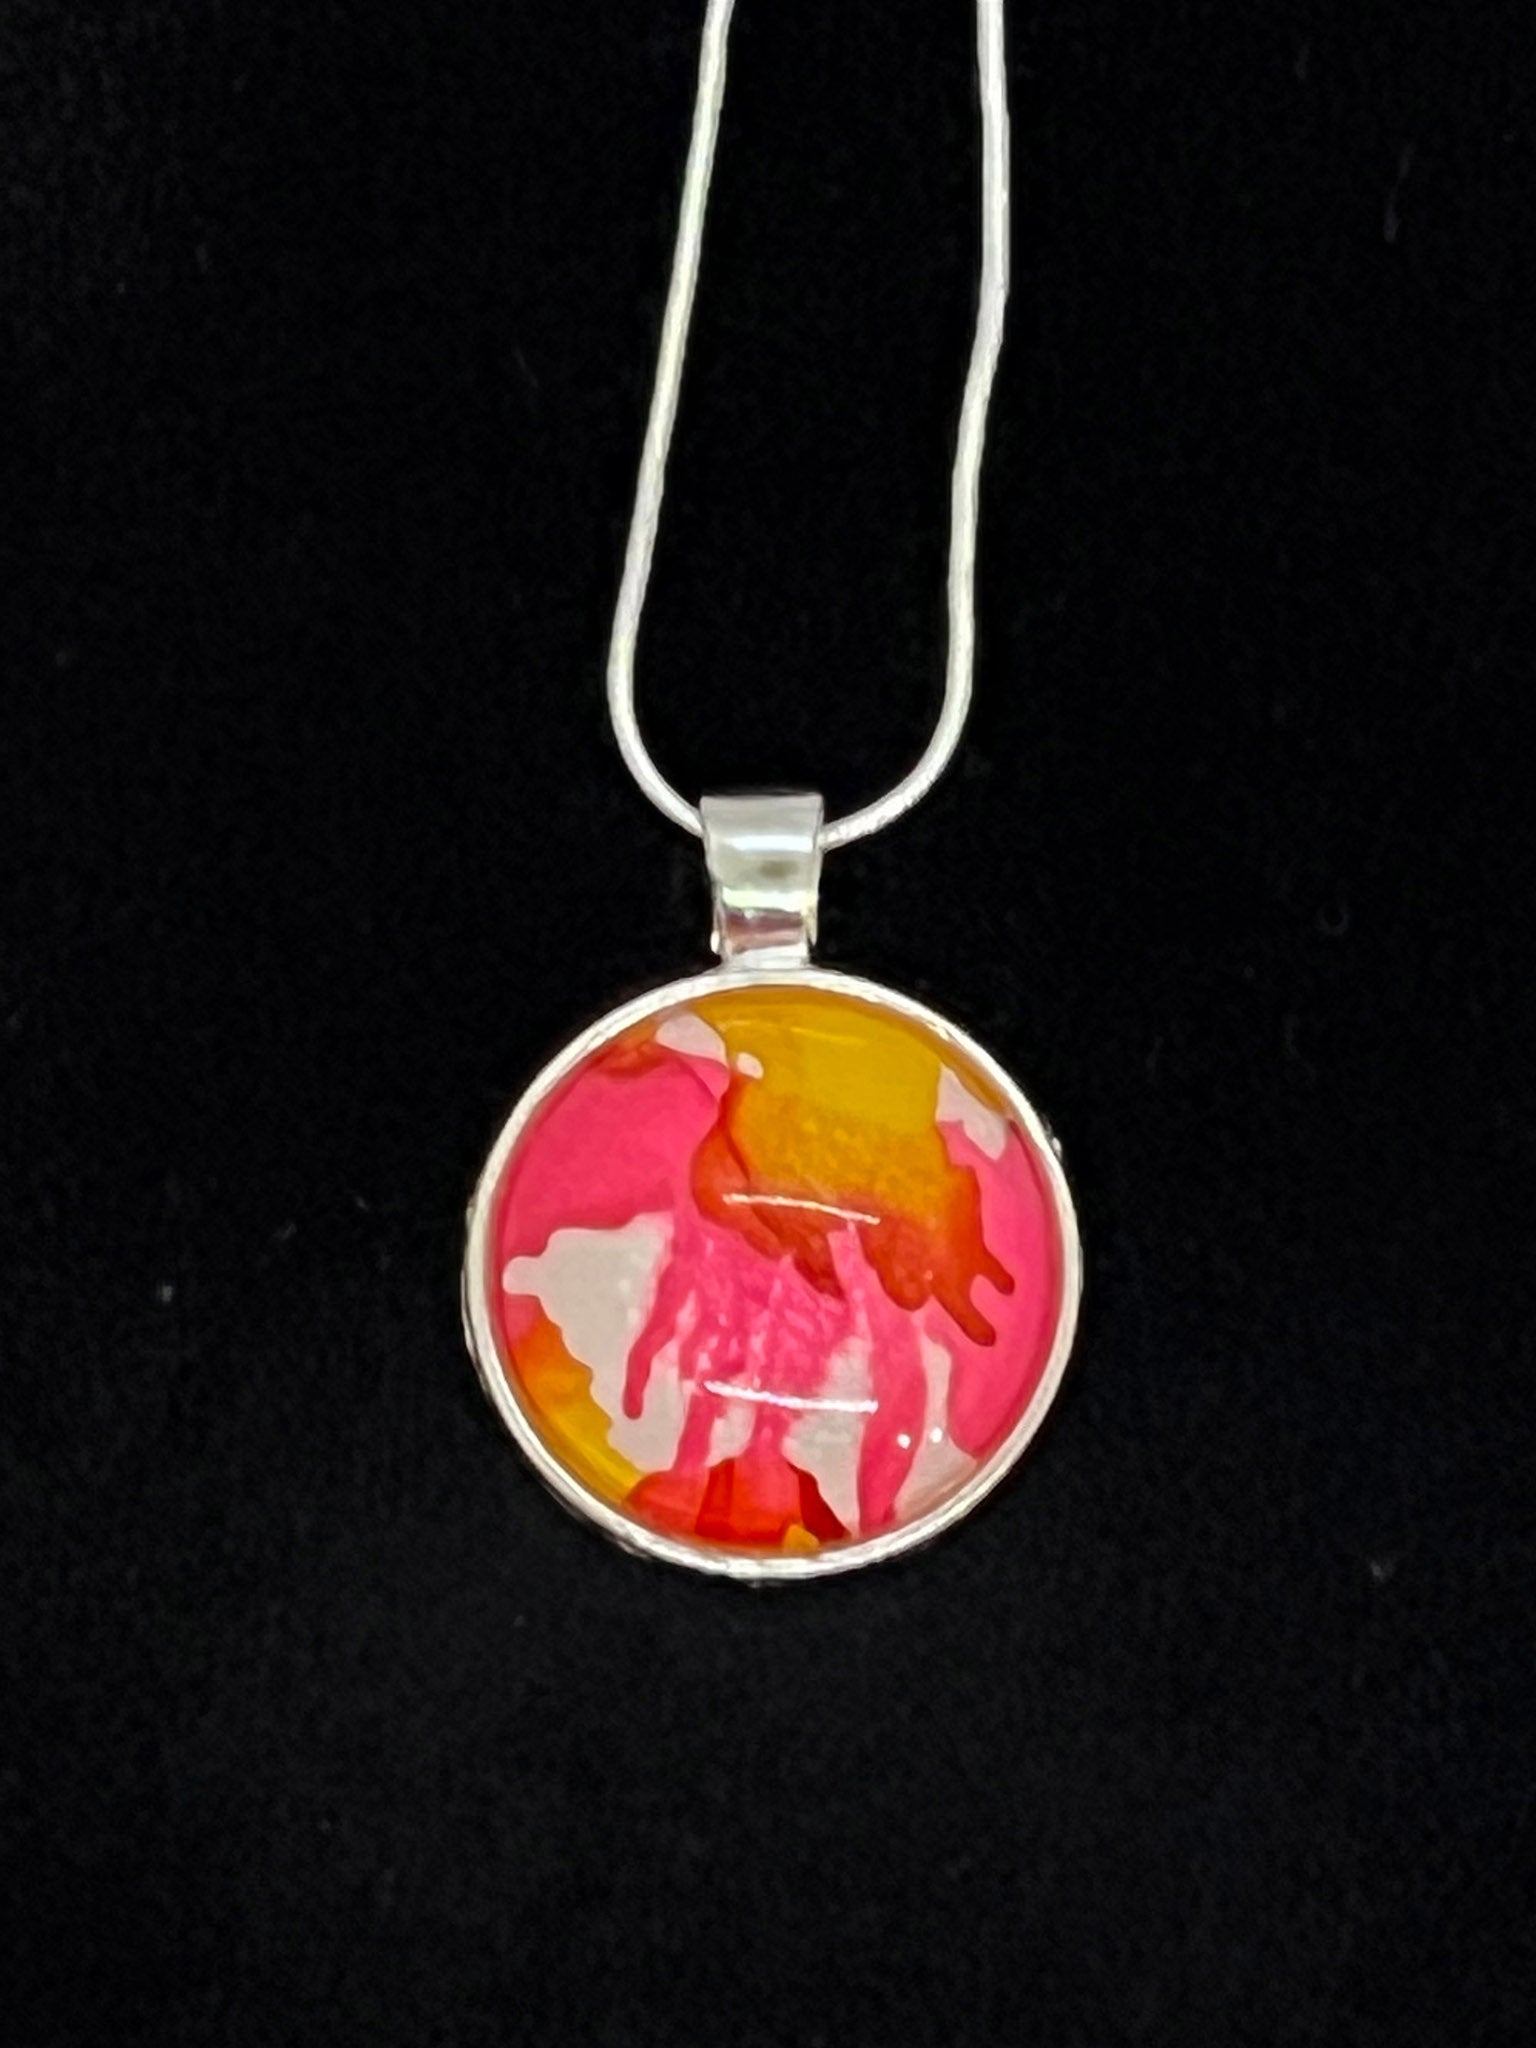 round cabachone dome silver pendant necklace with pink, yellow and white artwork